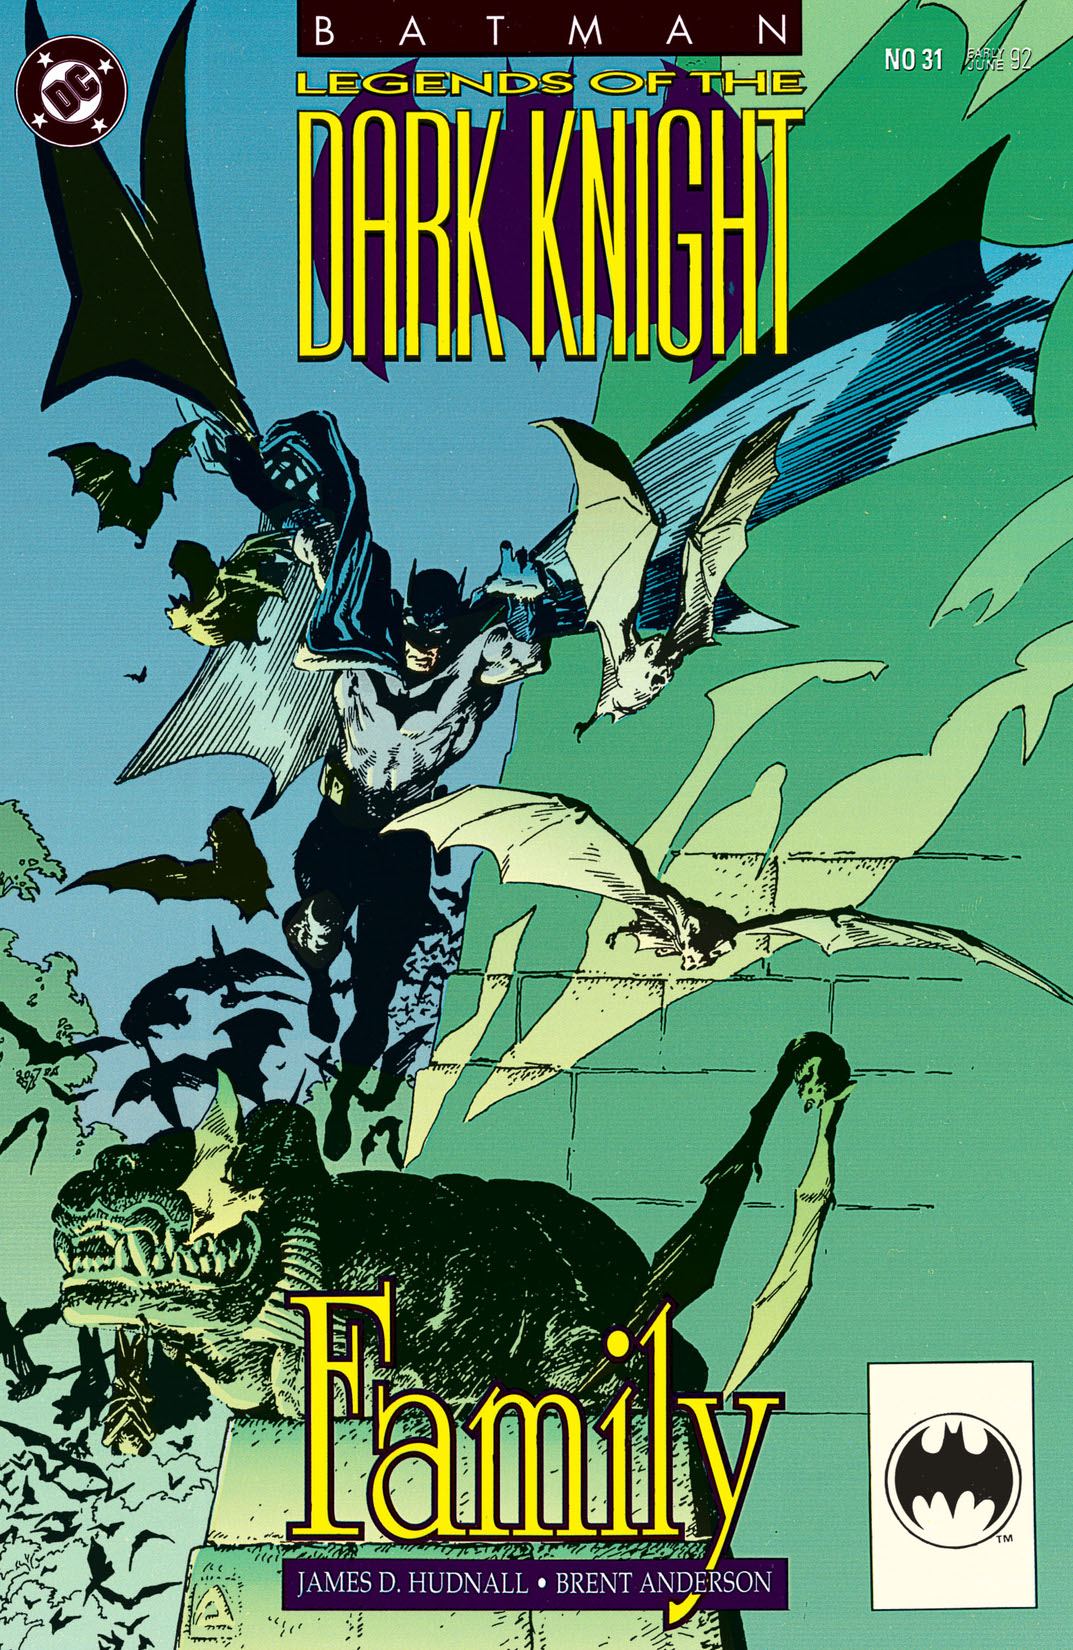 Batman: Legends of the Dark Knight #31 preview images